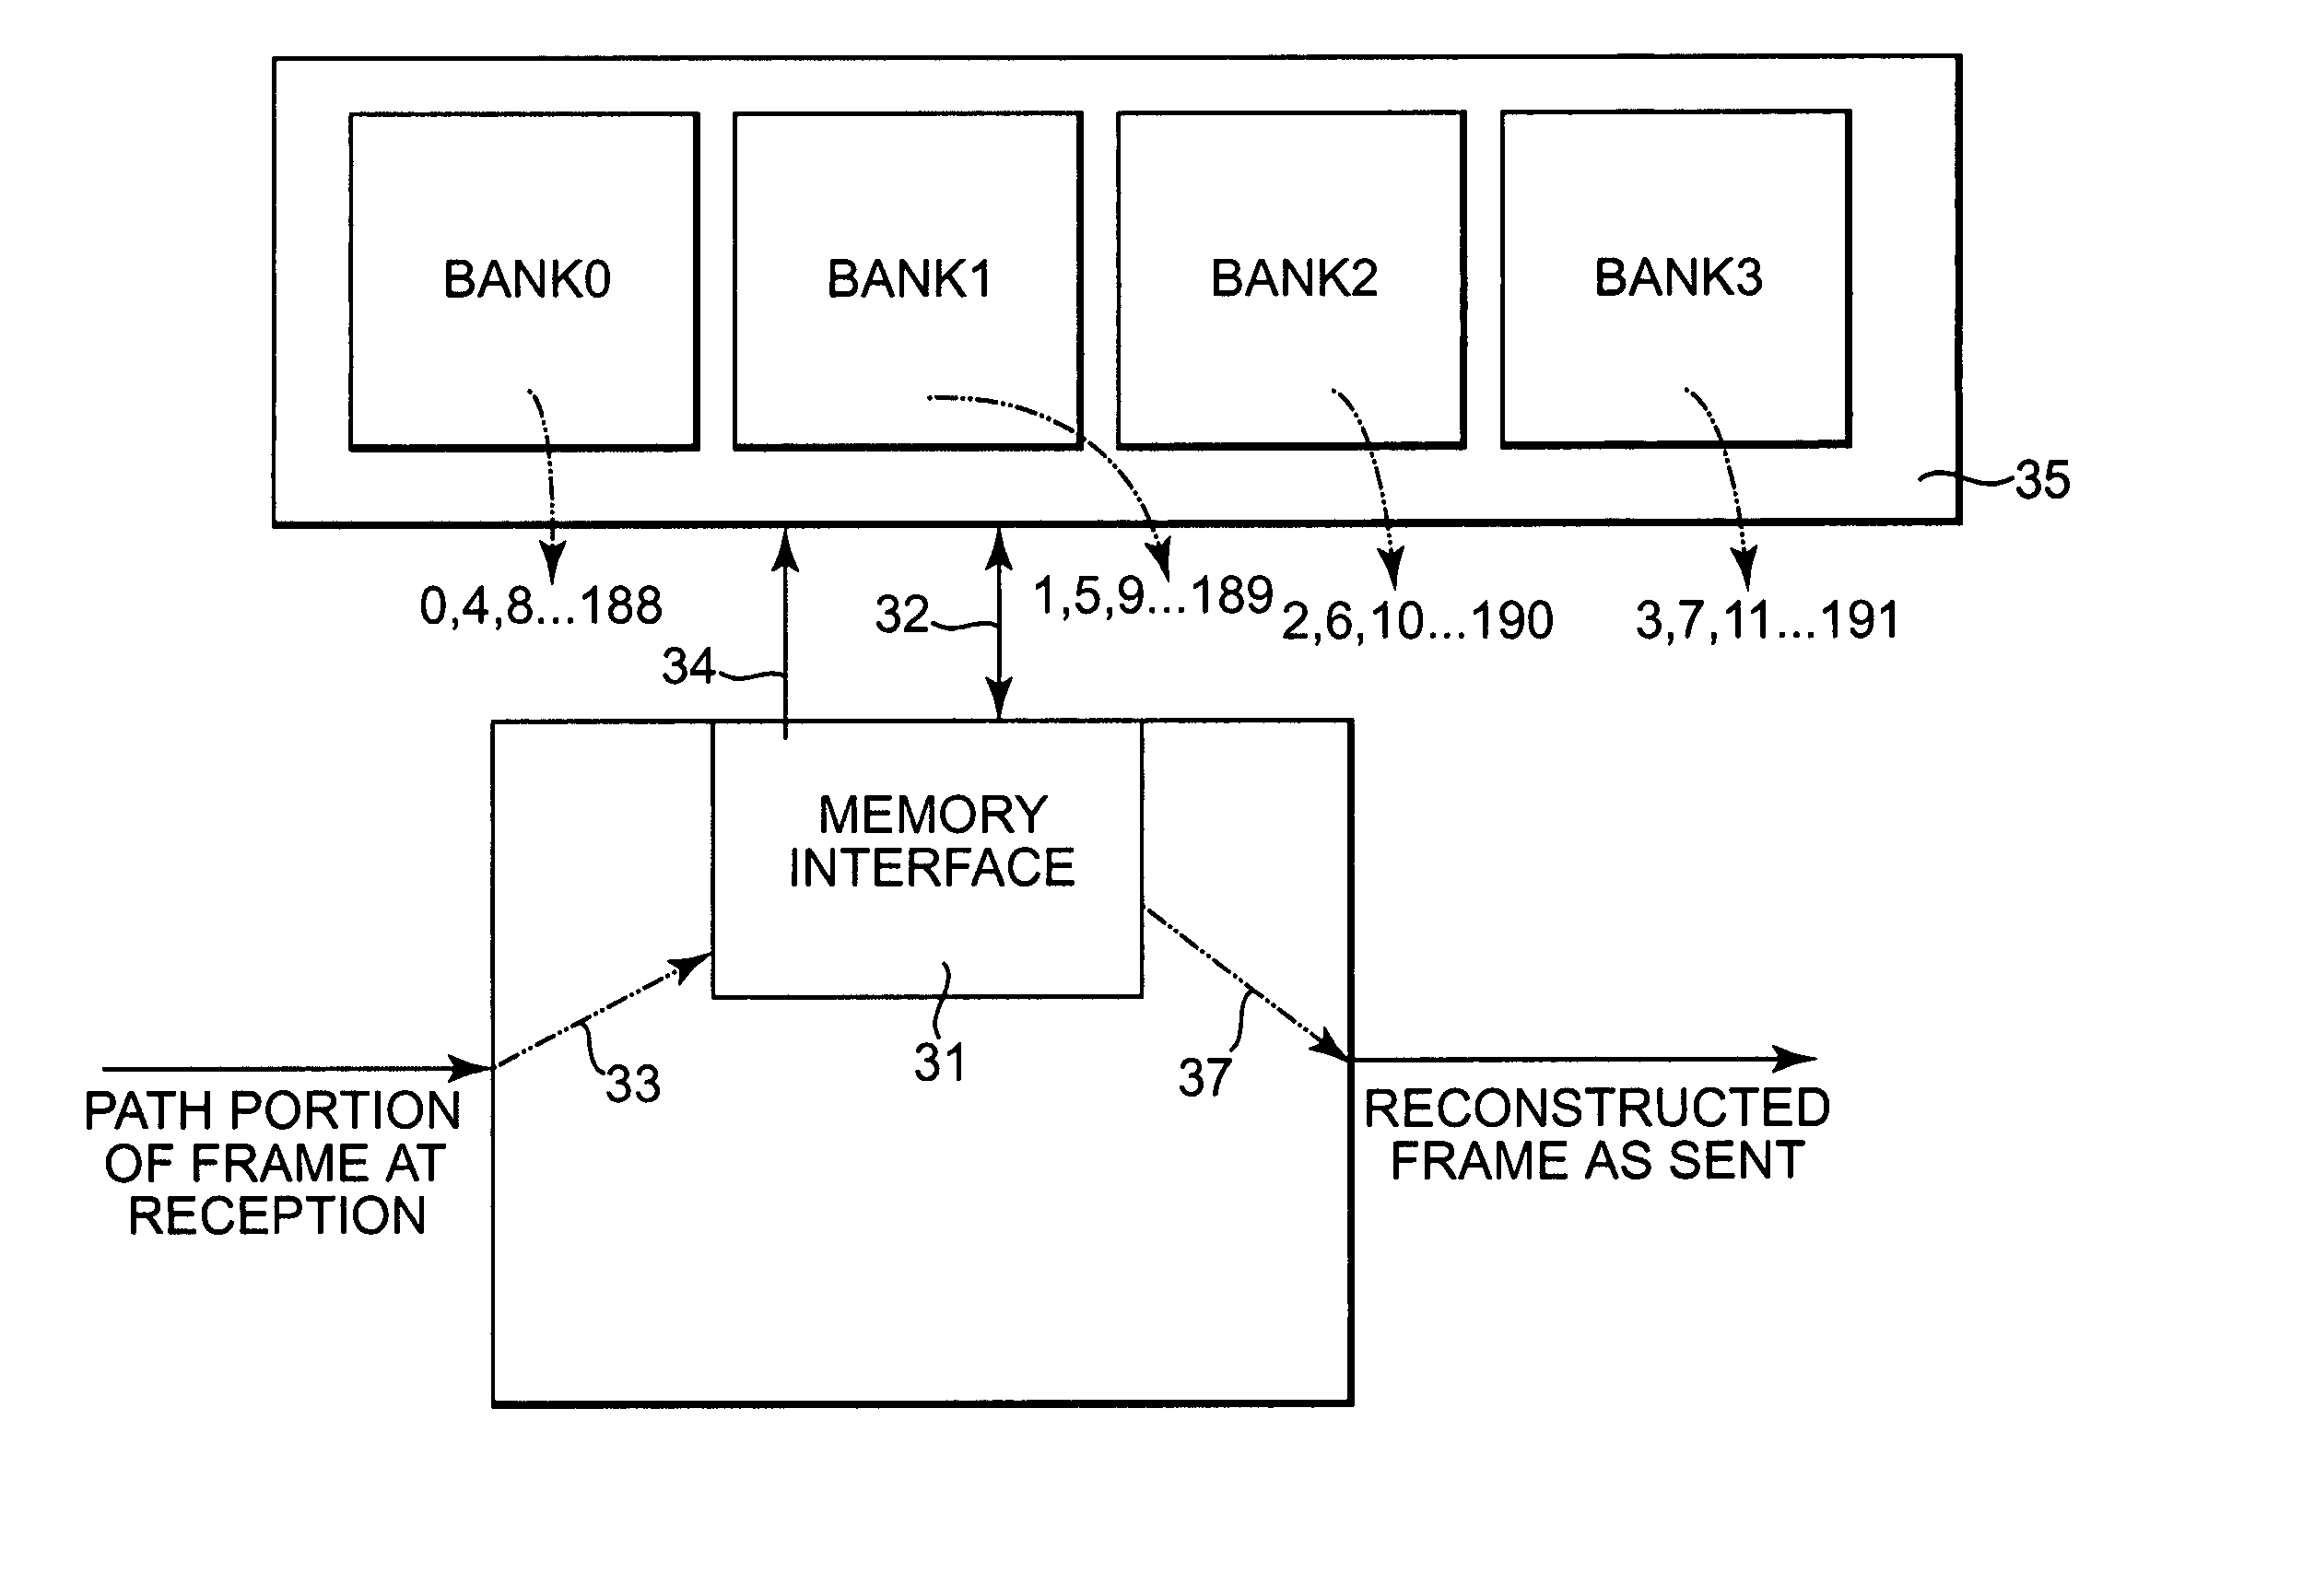 Virtual concatenation receiver processing with memory addressing scheme to avoid delays at address scatter points